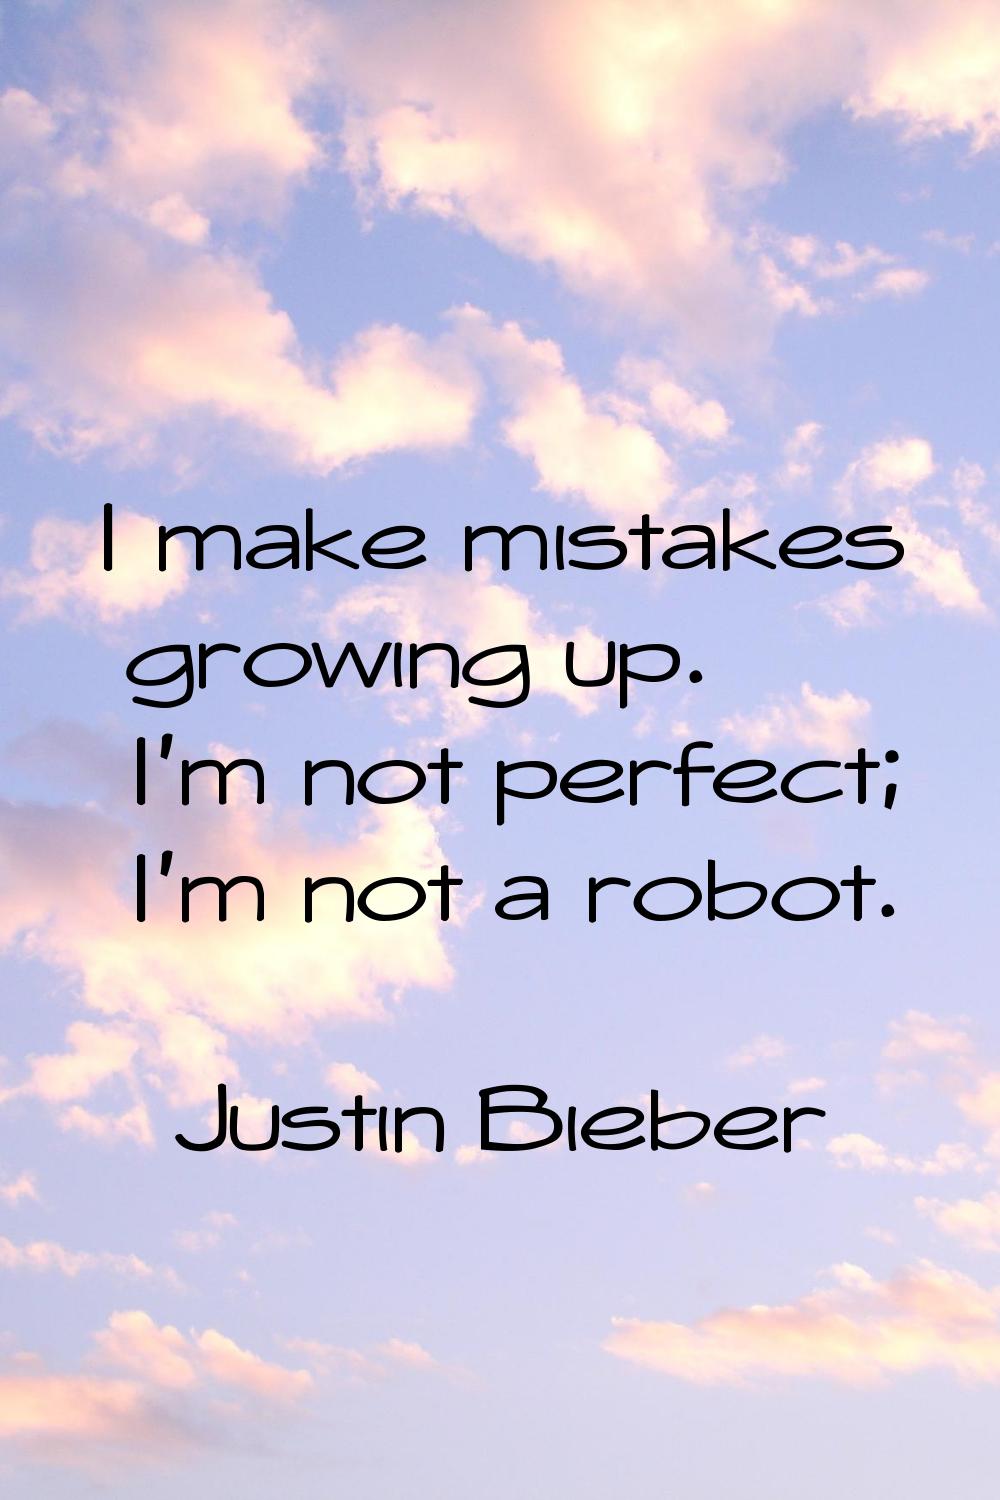 I make mistakes growing up. I'm not perfect; I'm not a robot.